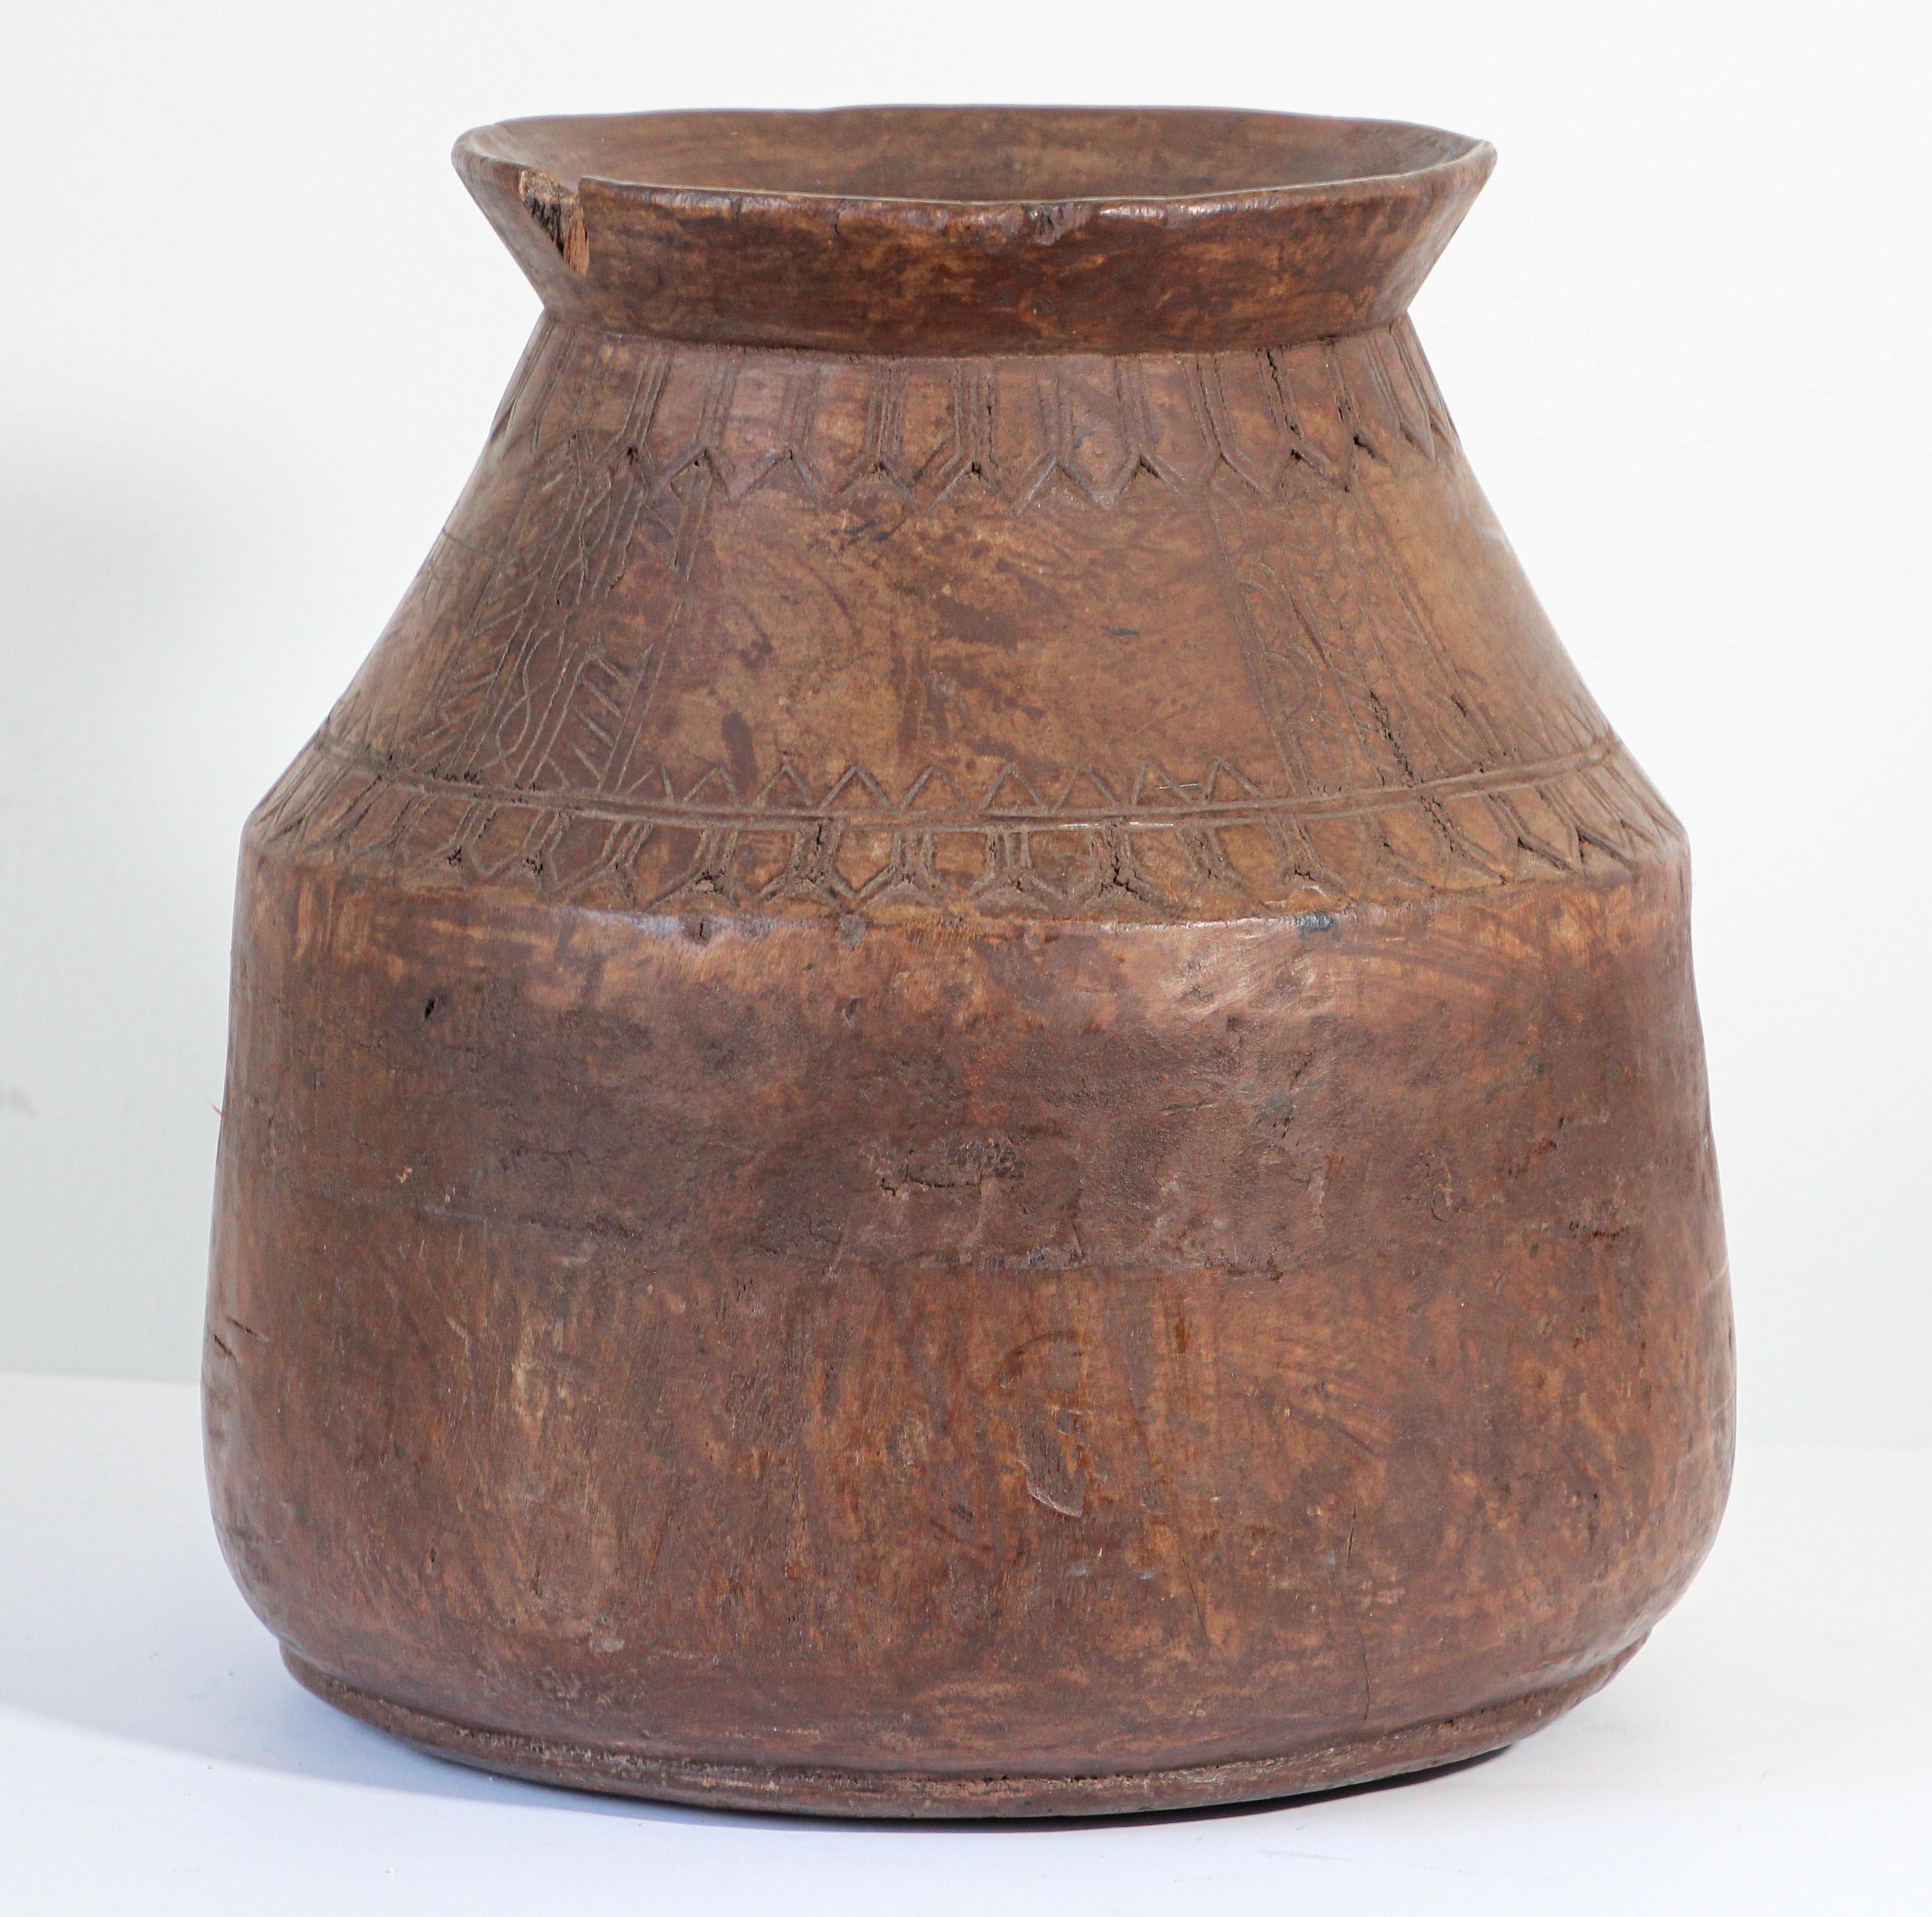 Indian hand carved wooden bowl. 
South Asian, India, late 19th century large-scale wooden carved vessel. 
This folk art hand carved wooden bowl is carved out of a single log and the linear carving marks can be seen on the inside.
This bowl is from